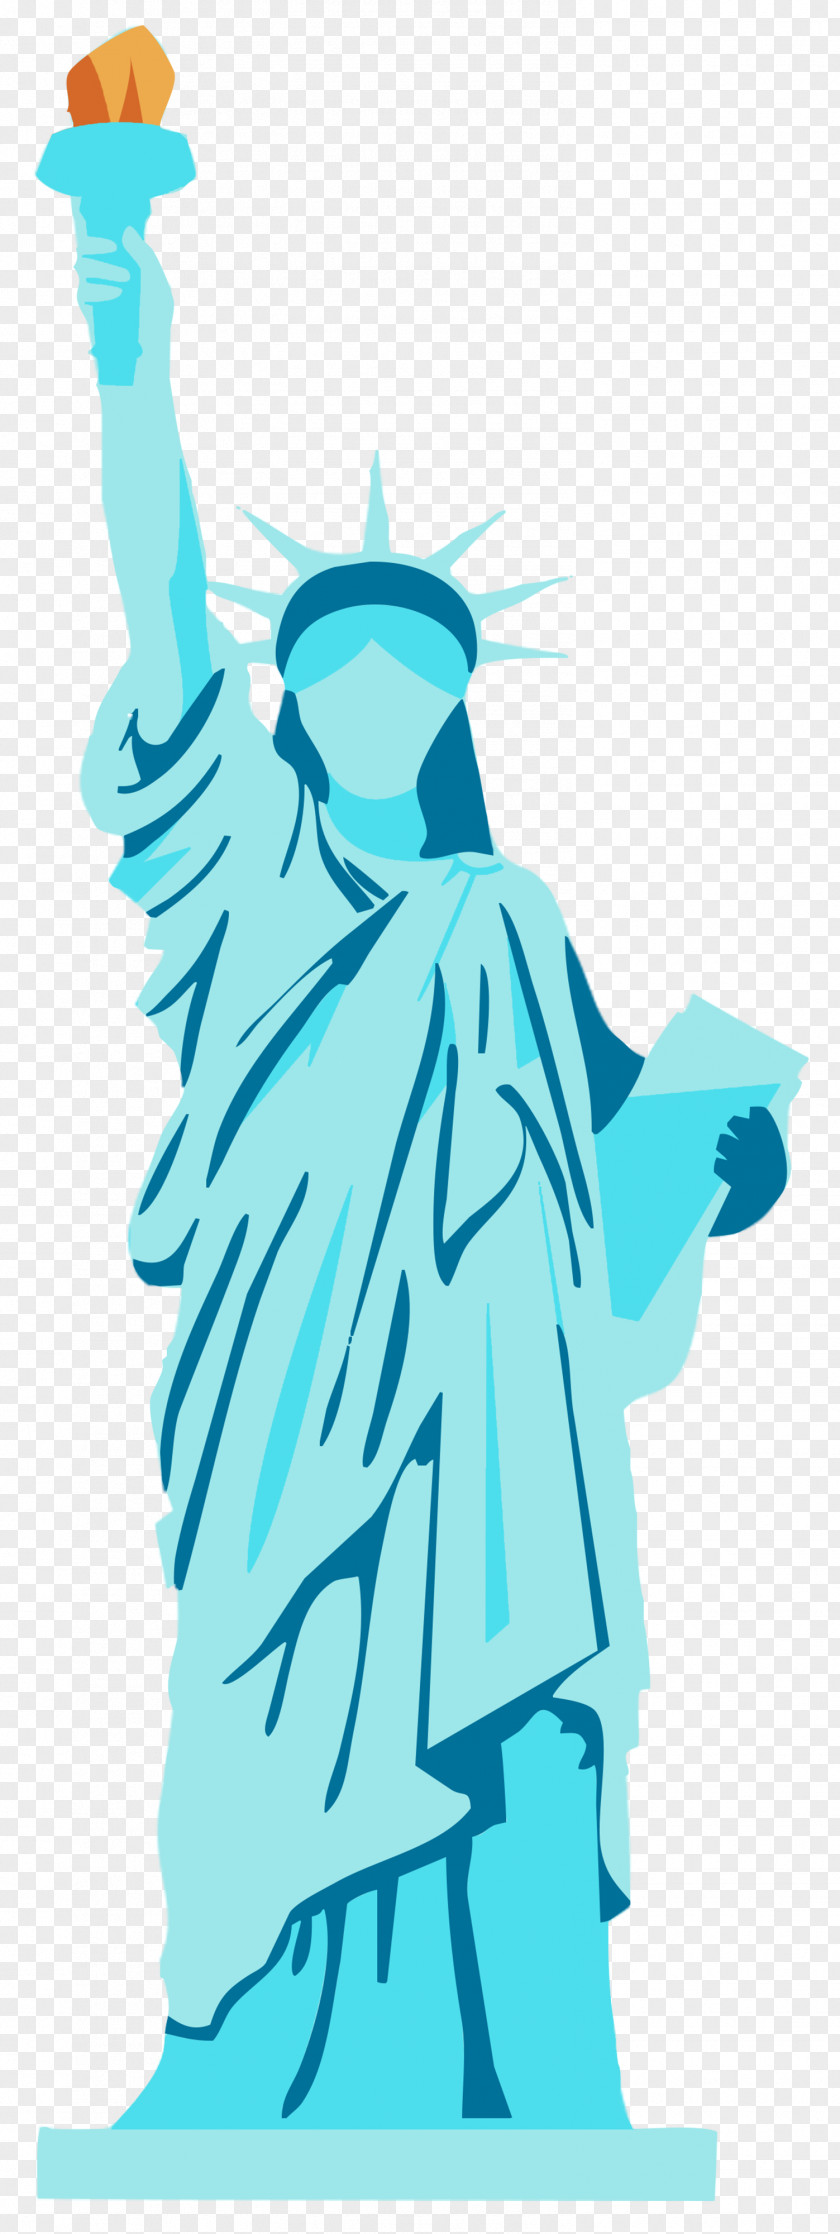 Lady Liberty Silhouette Clip Art Illustration Graphic Design Cartoon Character PNG